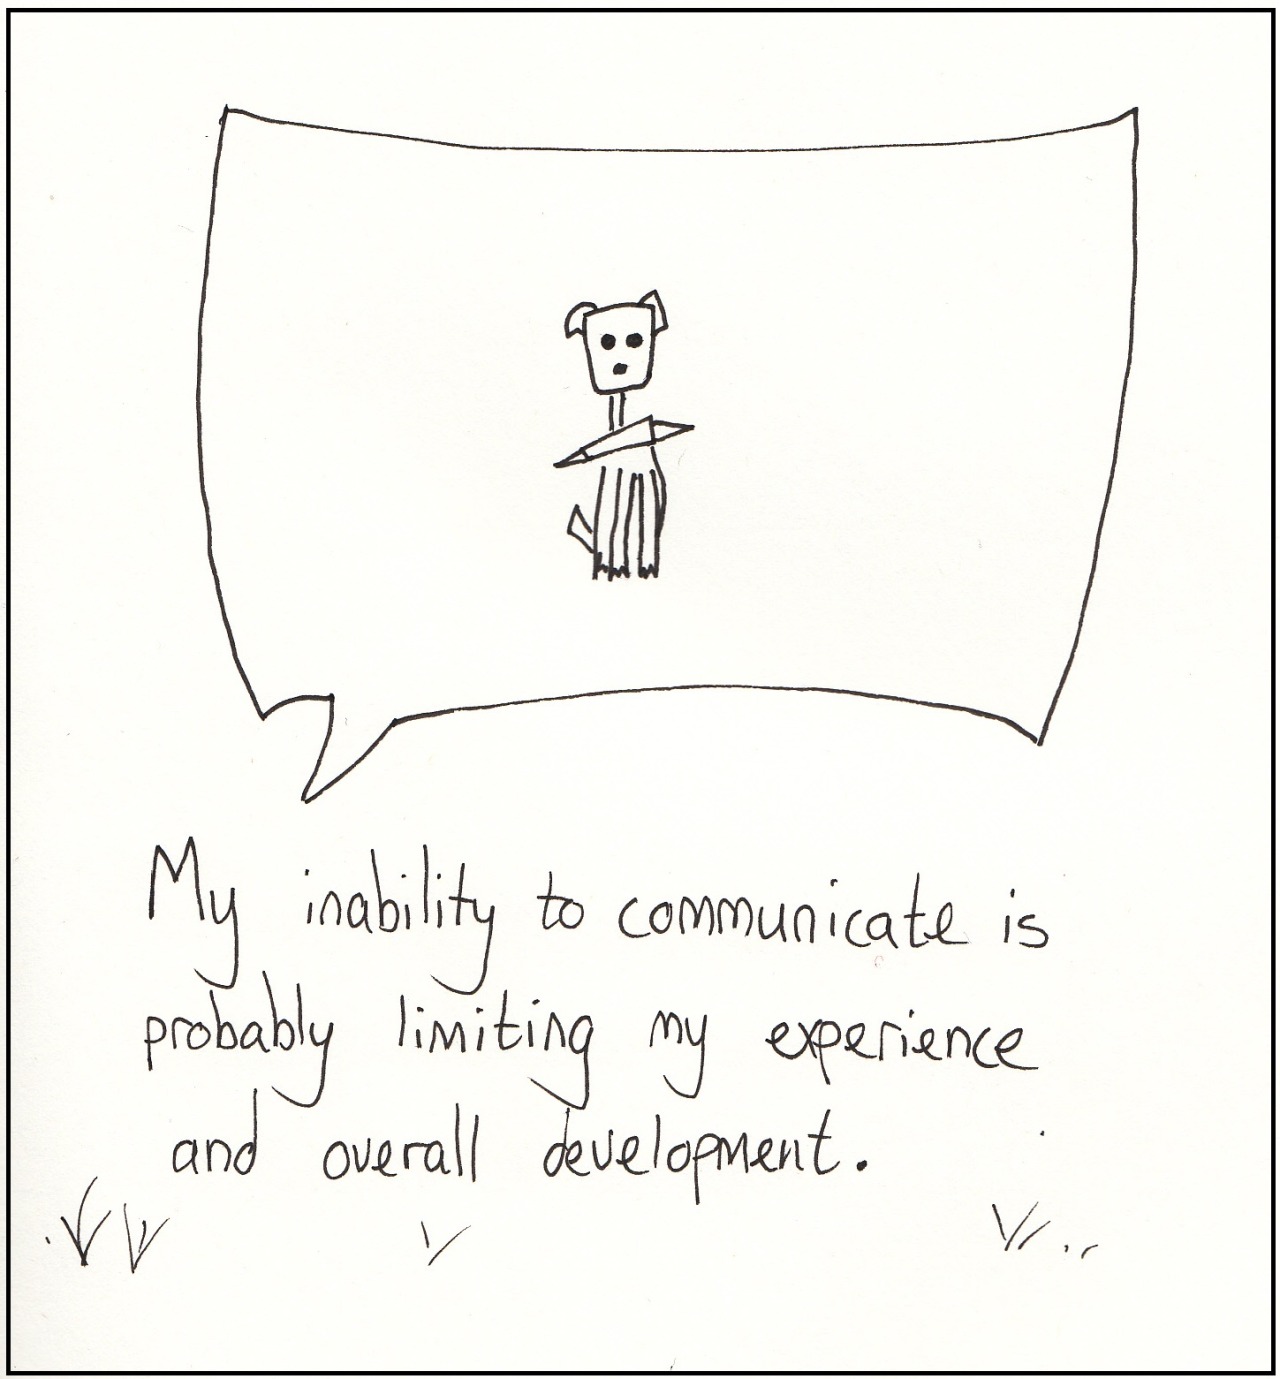 My inability to communicate is probably limiting my experience and overall development.